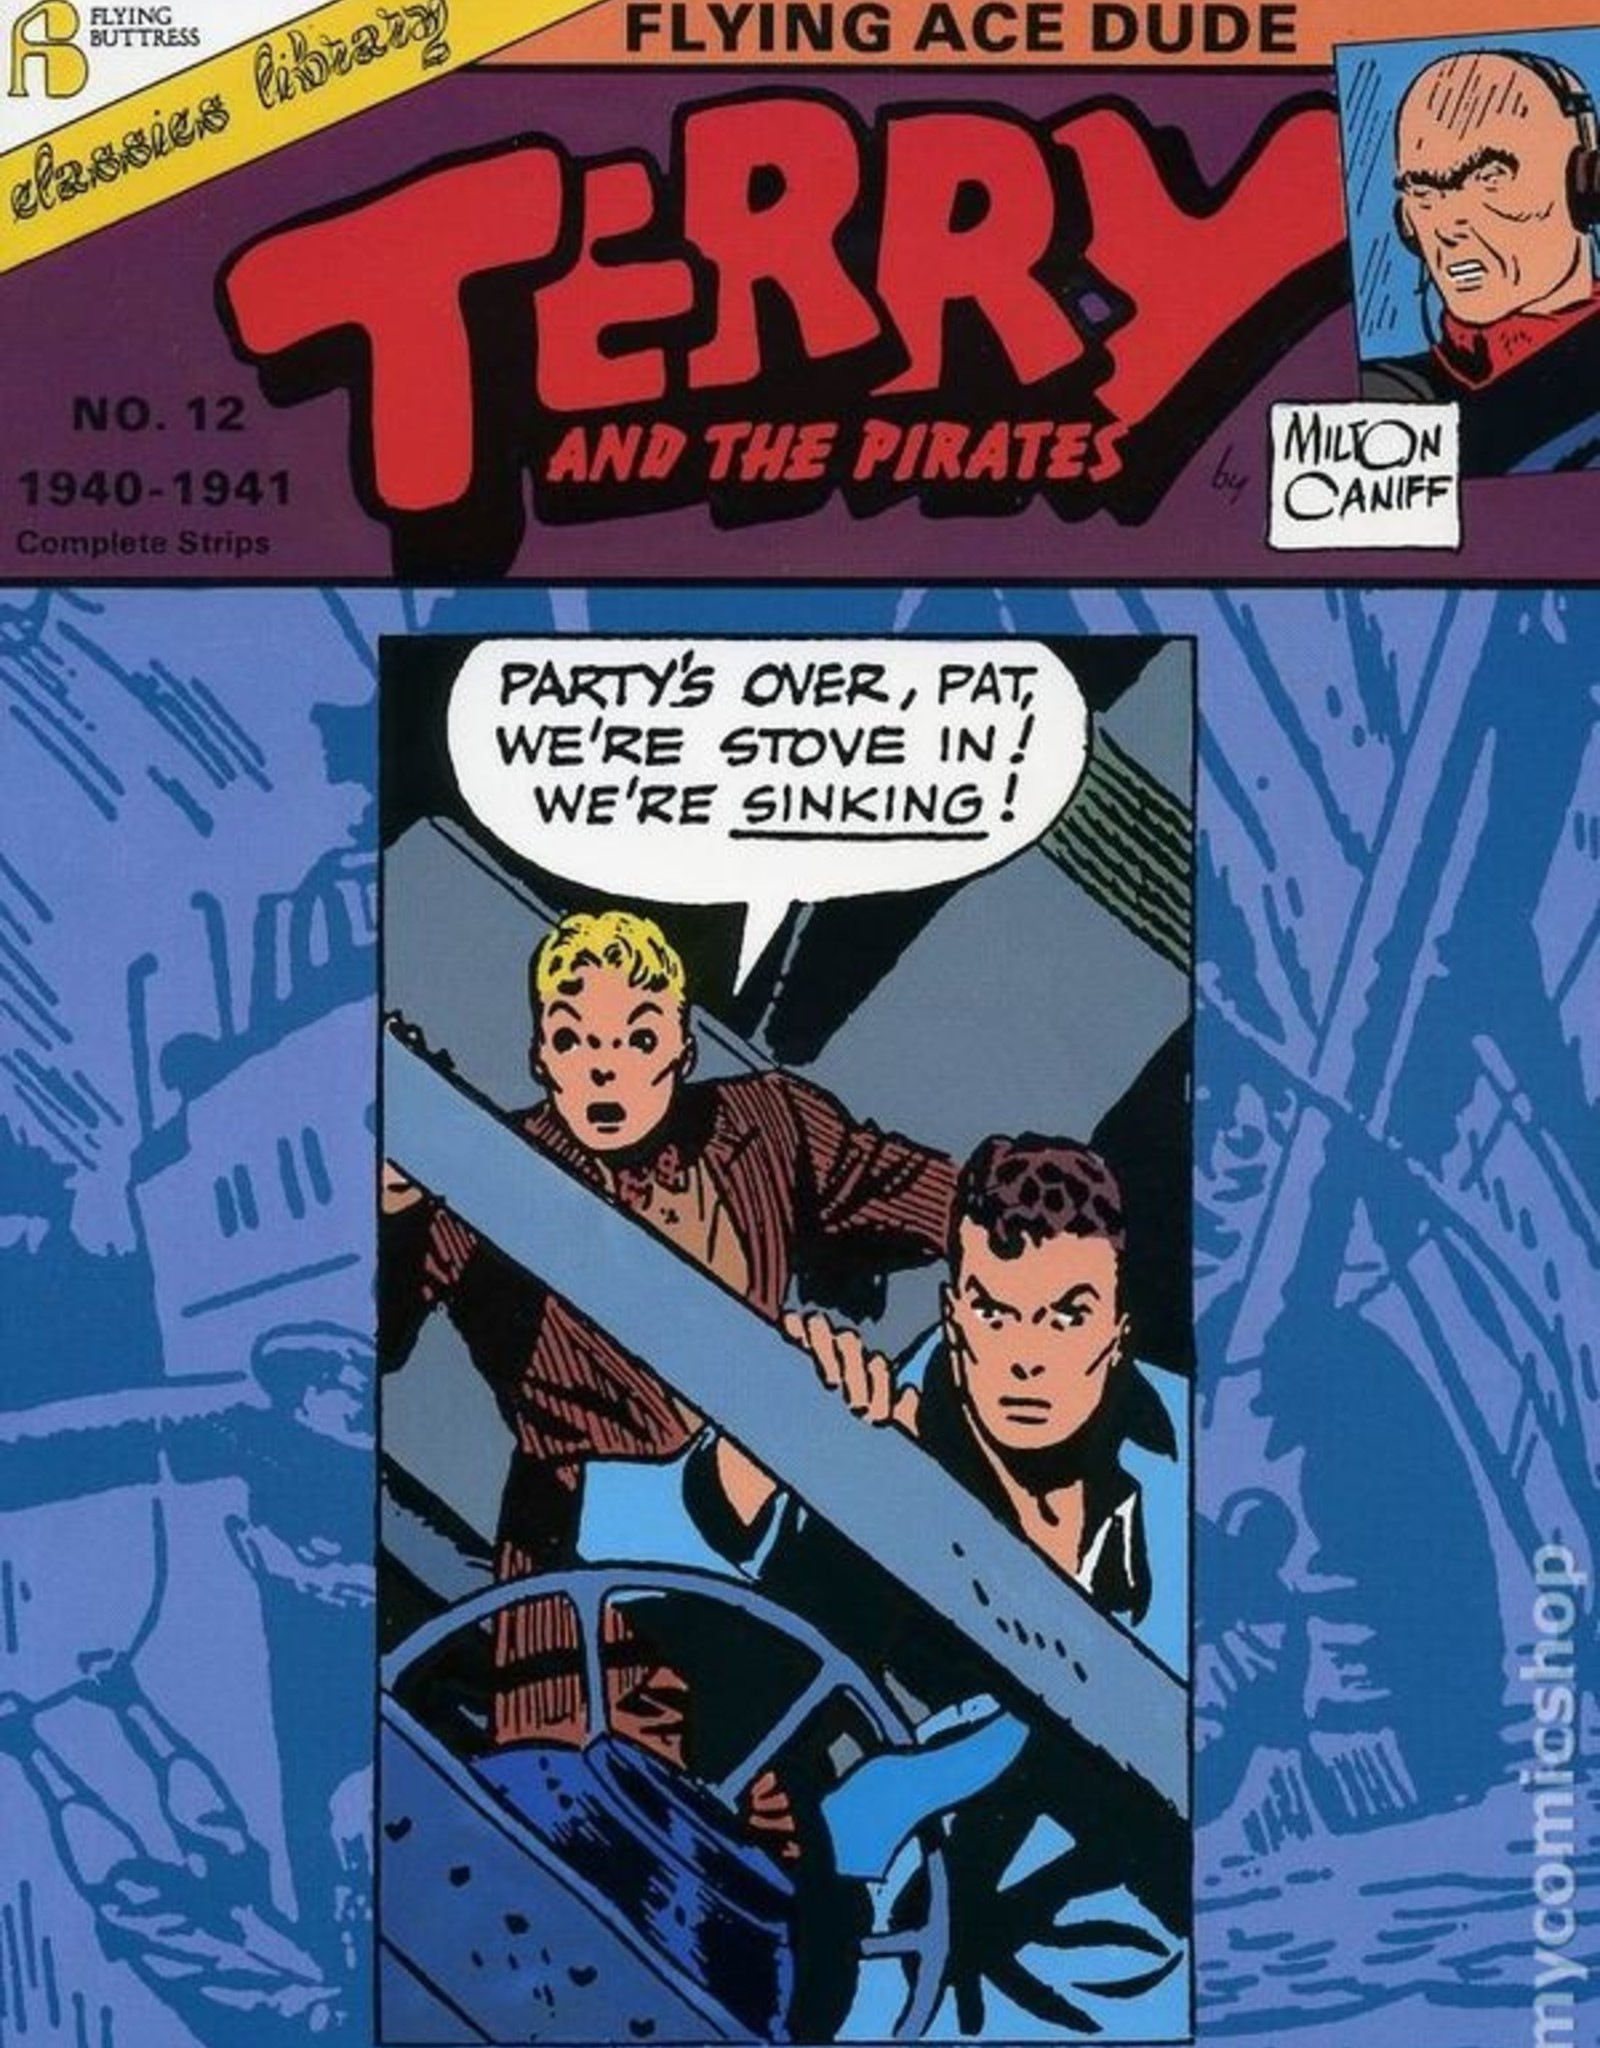 Flying Buttress Terry and the Pirates TP Volume 12 Flying Ace Dude